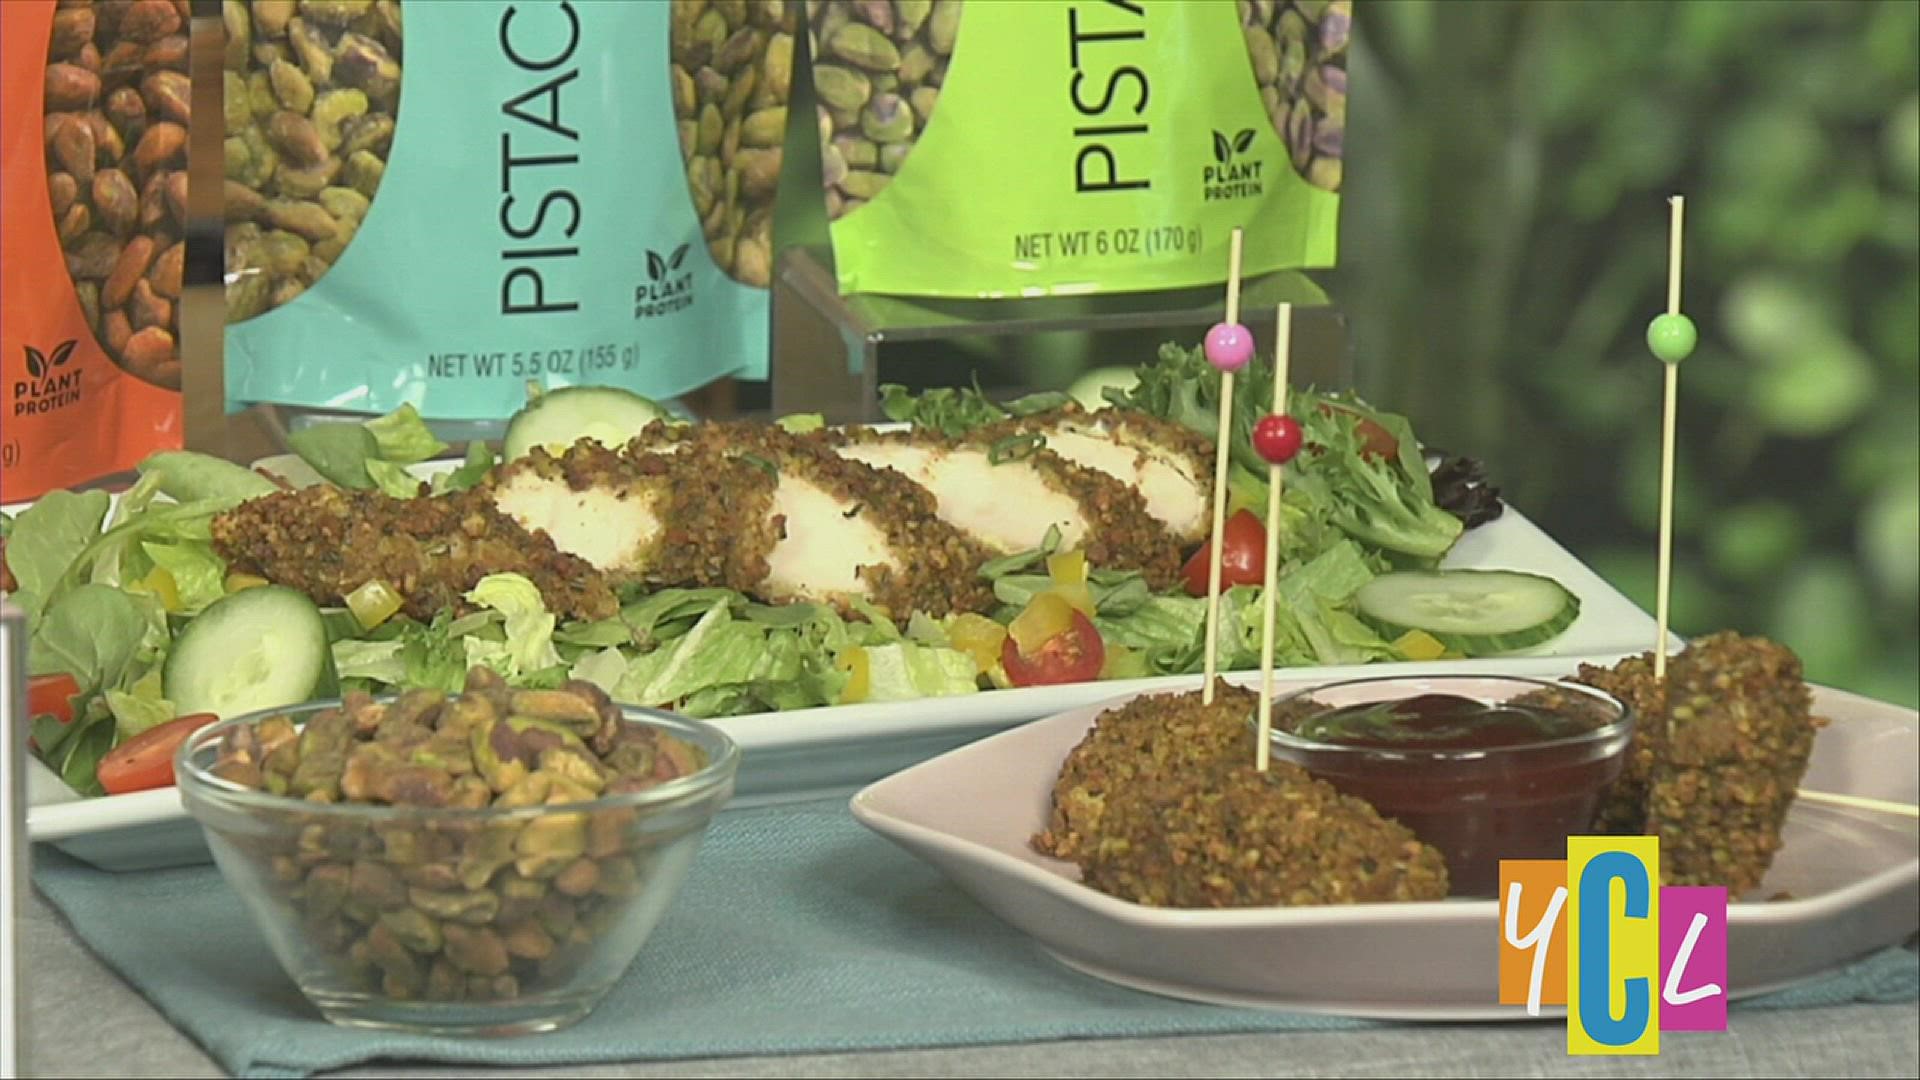 We get a show and tell with tips from for creating fun outdoor meals. This segment paid for by Wonderful Pistachios, Alaska Seafood, Ball and CHI-CHI'S®.